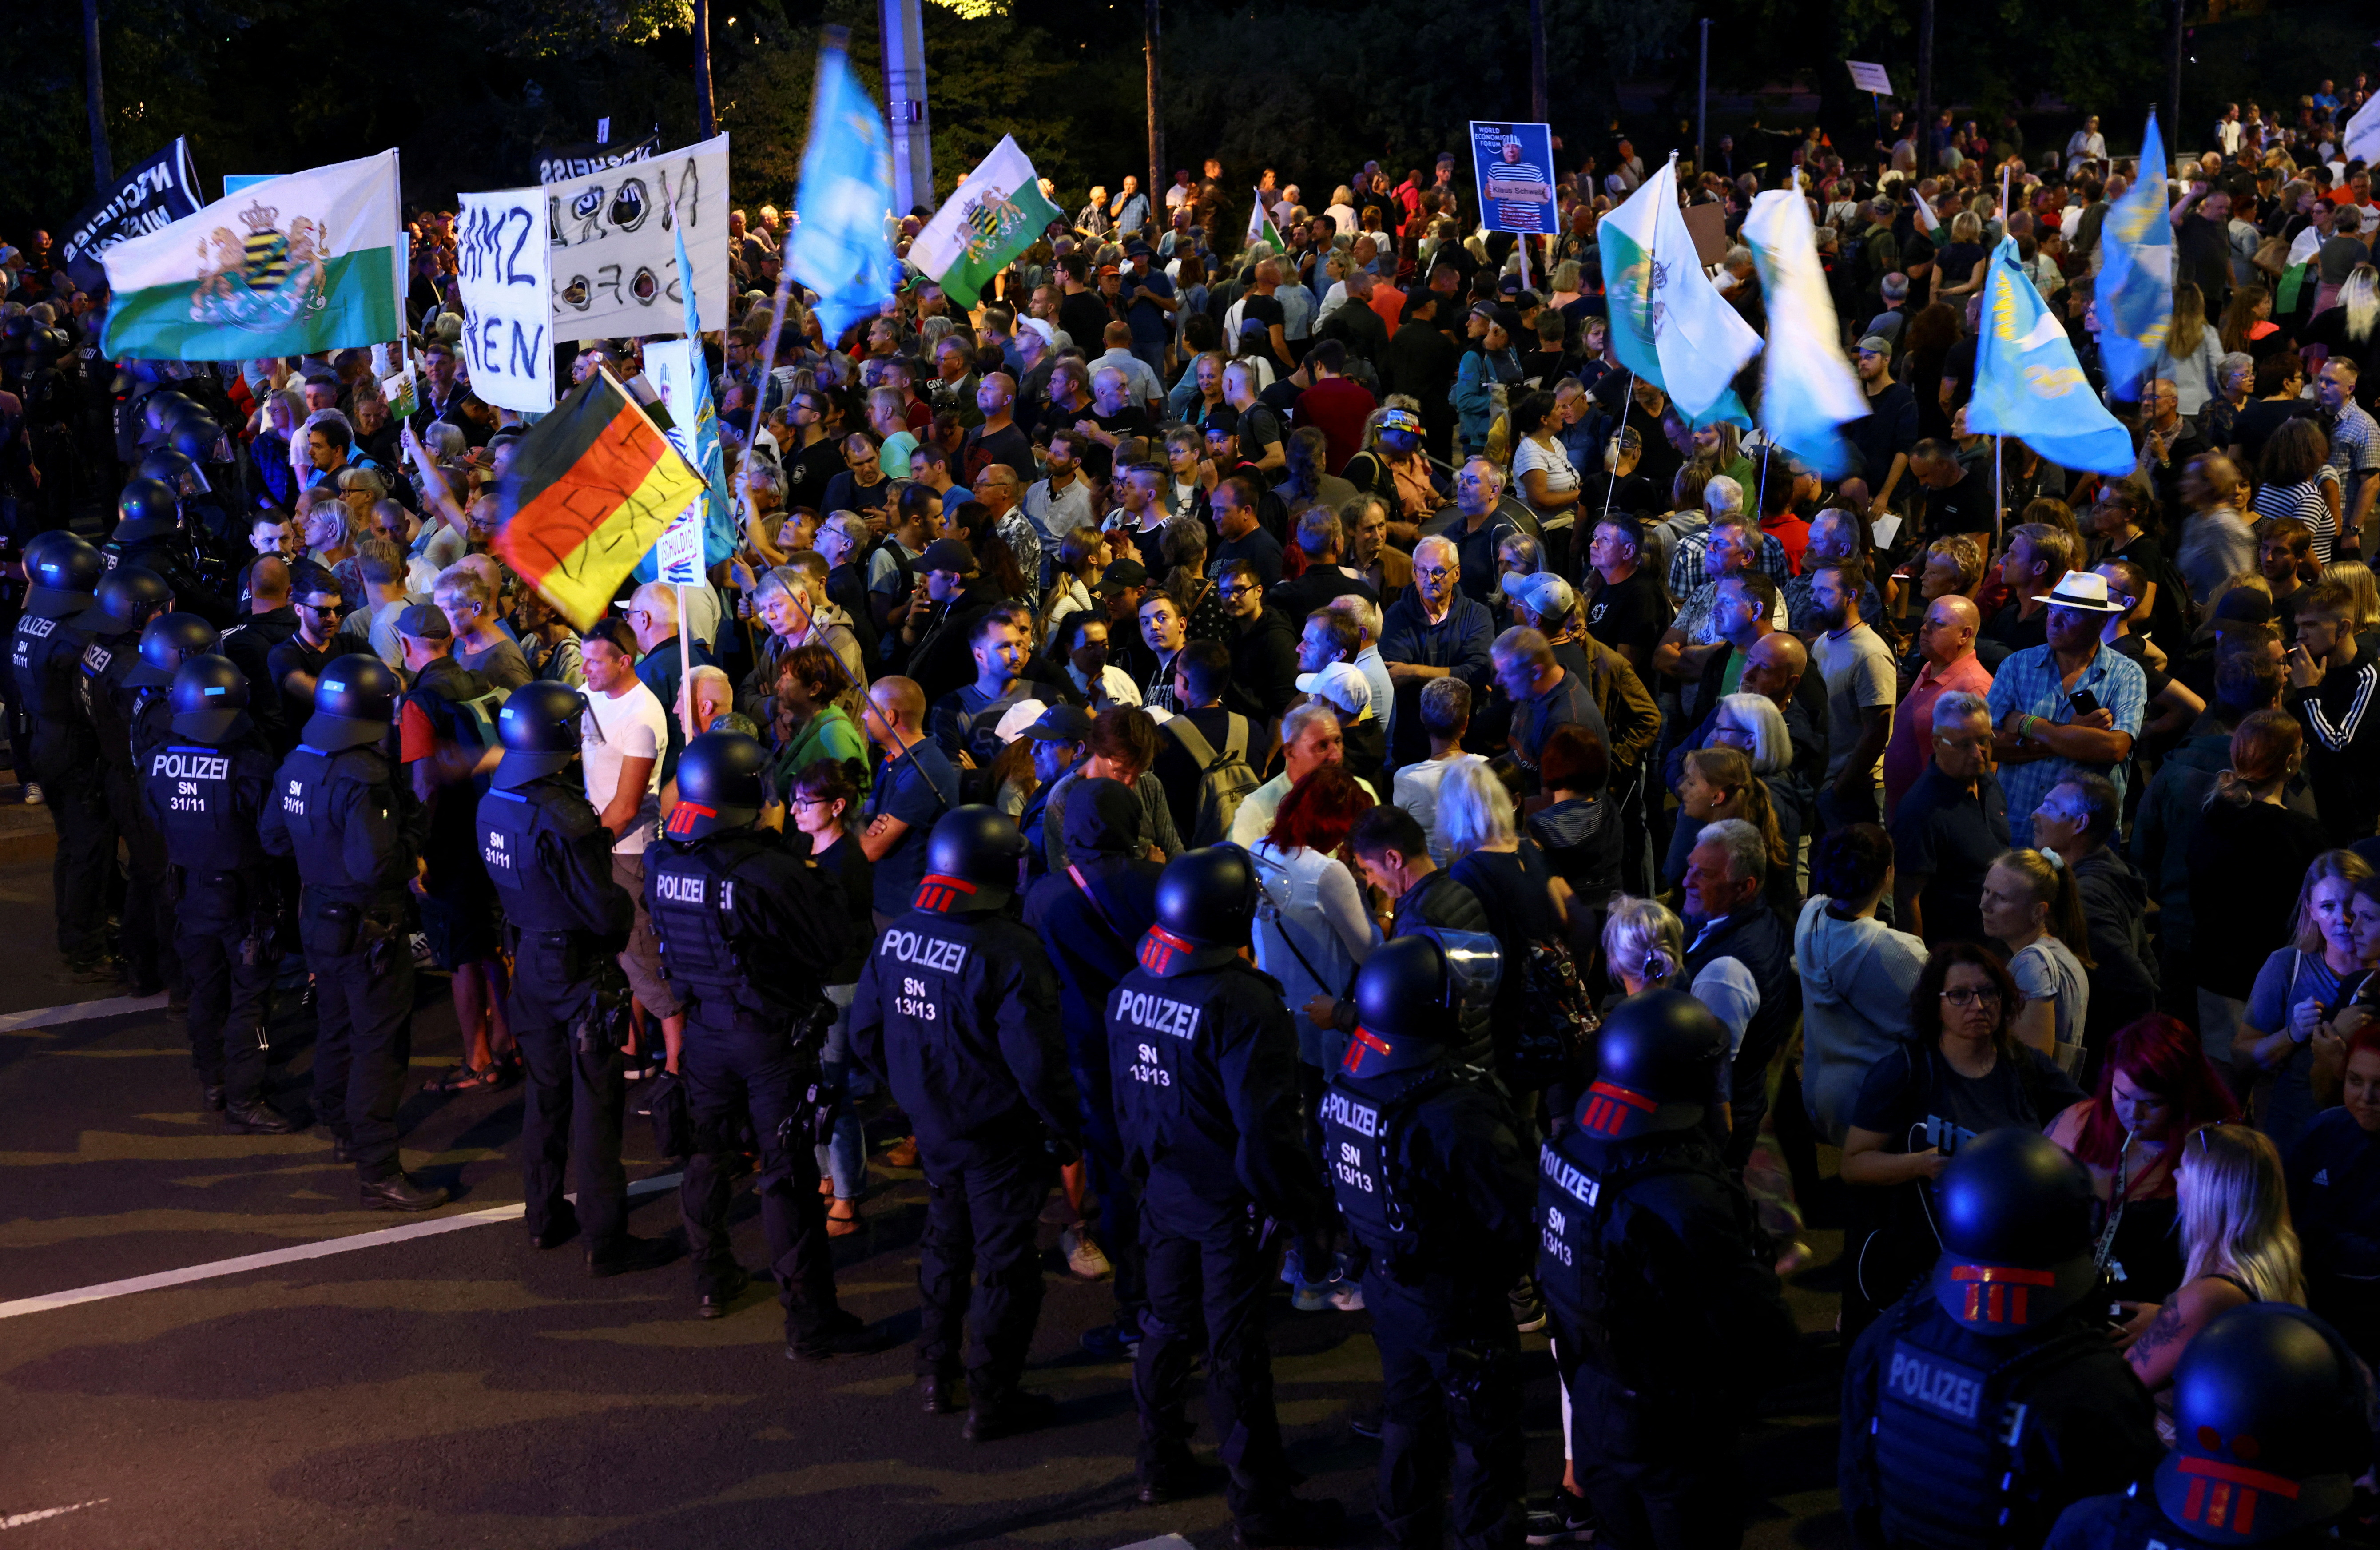 Protest against increasing energy prices and rising living expenses, in Leipzig